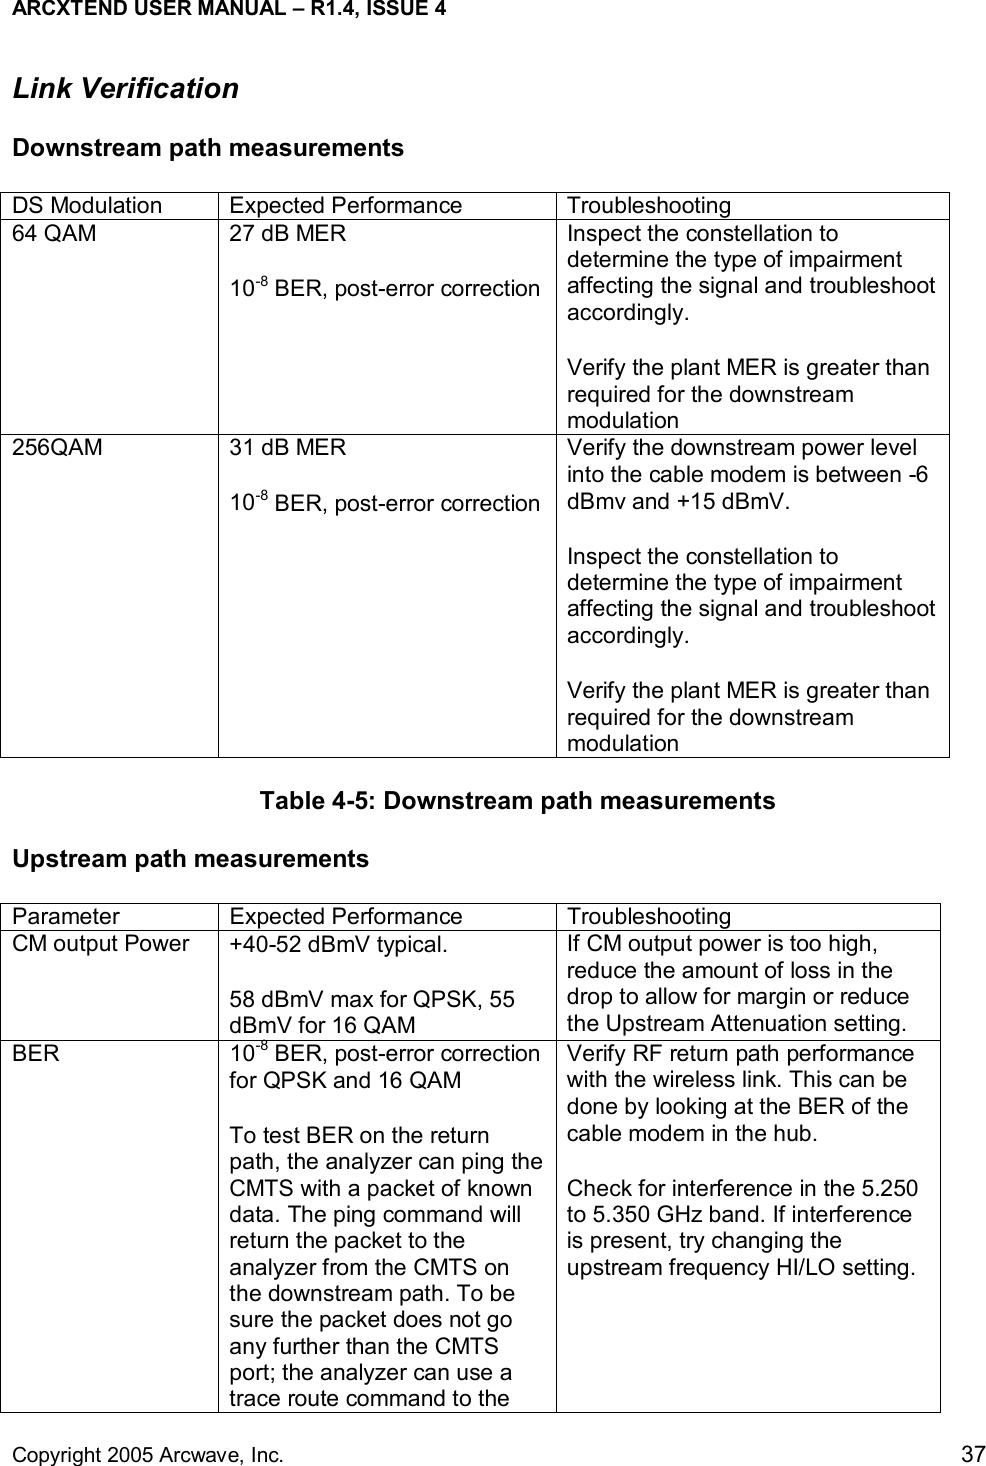 ARCXTEND USER MANUAL – R1.4, ISSUE 4  Copyright 2005 Arcwave, Inc.    37 Link Verification Downstream path measurements DS Modulation  Expected Performance  Troubleshooting 64 QAM   27 dB MER 10-8 BER, post-error correction Inspect the constellation to determine the type of impairment affecting the signal and troubleshoot accordingly. Verify the plant MER is greater than required for the downstream modulation 256QAM   31 dB MER 10-8 BER, post-error correction Verify the downstream power level into the cable modem is between -6 dBmv and +15 dBmV.  Inspect the constellation to determine the type of impairment affecting the signal and troubleshoot accordingly. Verify the plant MER is greater than required for the downstream modulation Table 4-5: Downstream path measurements Upstream path measurements Parameter Expected Performance Troubleshooting CM output Power  +40-52 dBmV typical.  58 dBmV max for QPSK, 55 dBmV for 16 QAM If CM output power is too high, reduce the amount of loss in the drop to allow for margin or reduce the Upstream Attenuation setting. BER 10-8 BER, post-error correction for QPSK and 16 QAM To test BER on the return path, the analyzer can ping the CMTS with a packet of known data. The ping command will return the packet to the analyzer from the CMTS on the downstream path. To be sure the packet does not go any further than the CMTS port; the analyzer can use a trace route command to the Verify RF return path performance with the wireless link. This can be done by looking at the BER of the cable modem in the hub.  Check for interference in the 5.250 to 5.350 GHz band. If interference is present, try changing the upstream frequency HI/LO setting.  